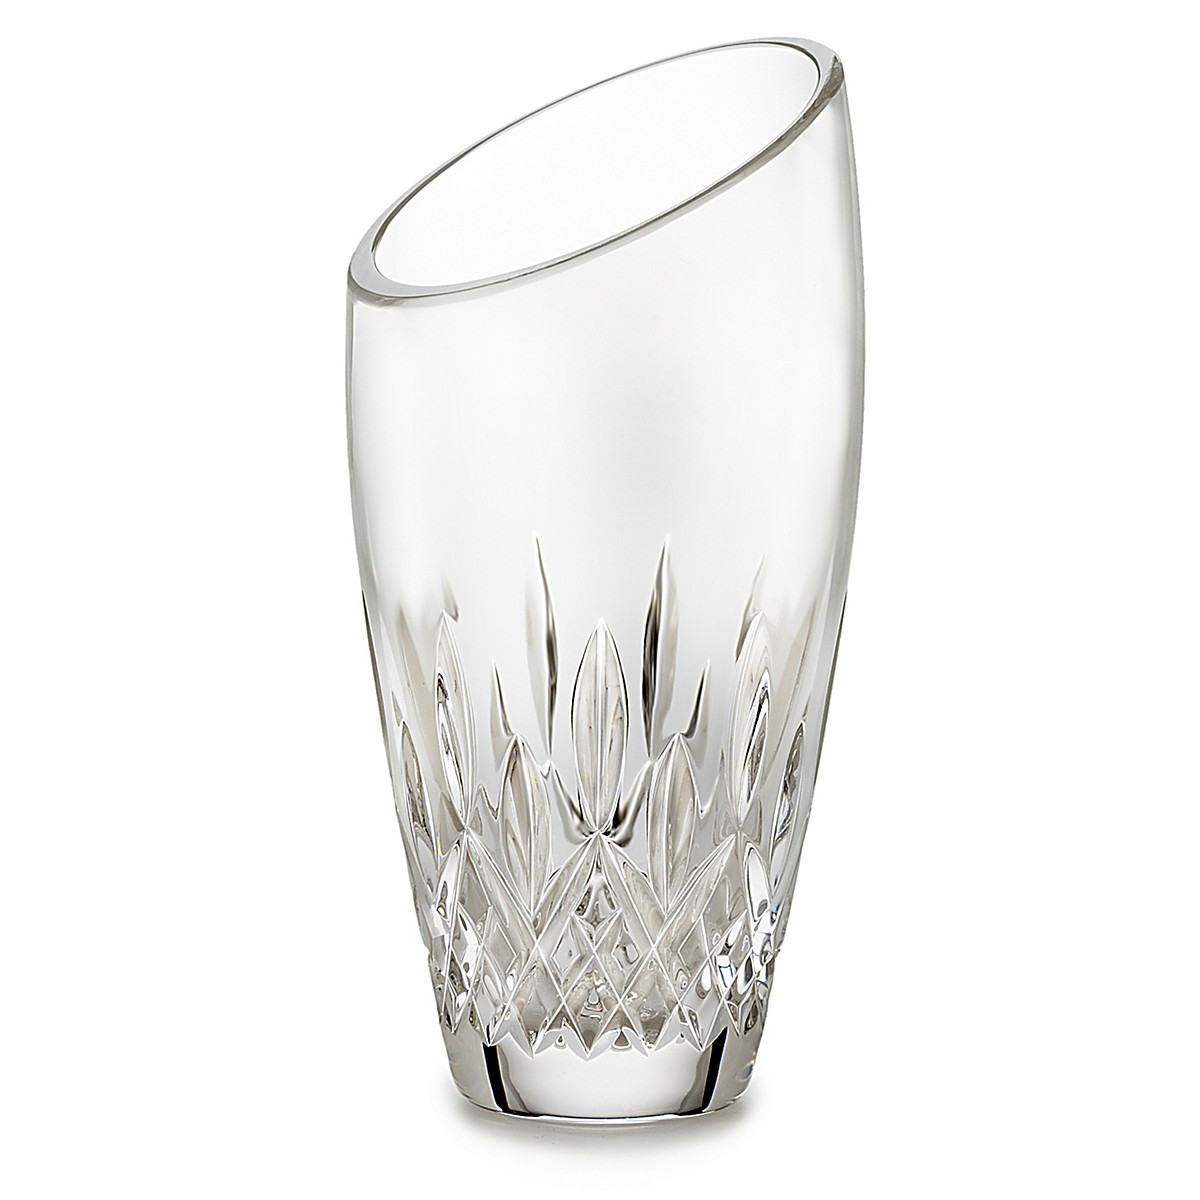 28 Amazing Mikasa Crystal Vase Value 2024 free download mikasa crystal vase value of waterford crystal vase patterns www topsimages com throughout vases design pictures waterford lismore vase crystal in essence angled round the next generation jp